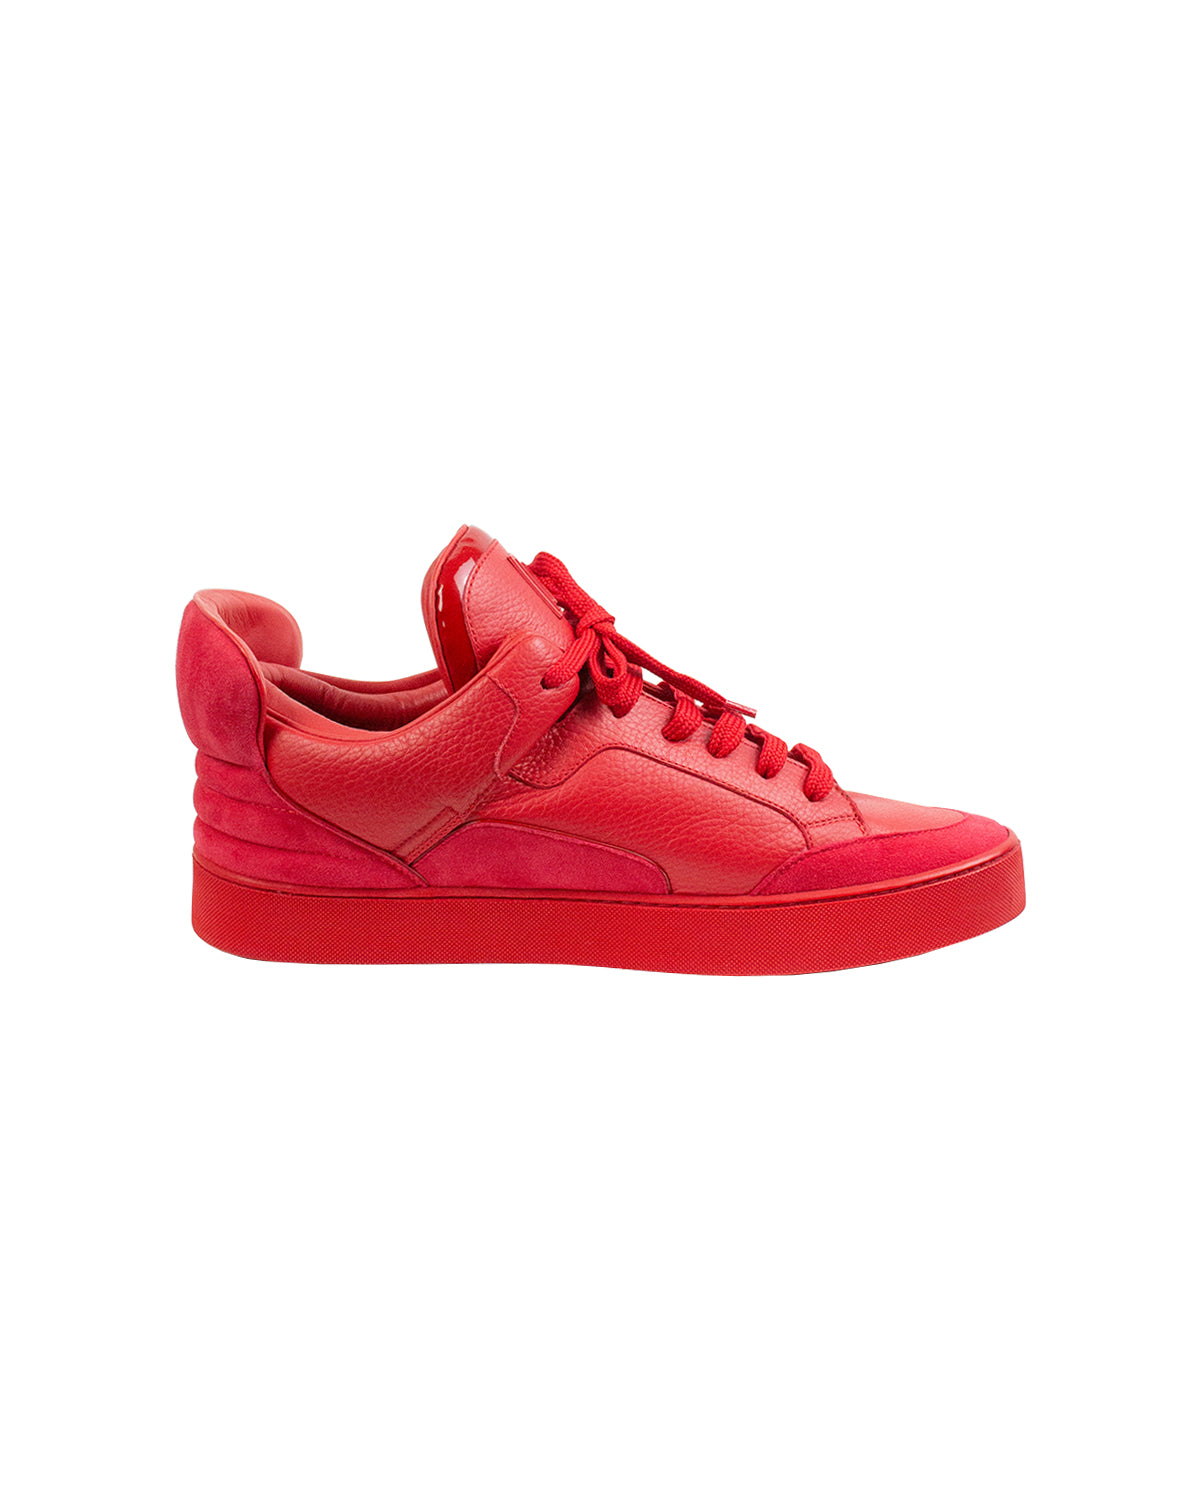 Kanye West for Louis Vuitton Sneakers Preview